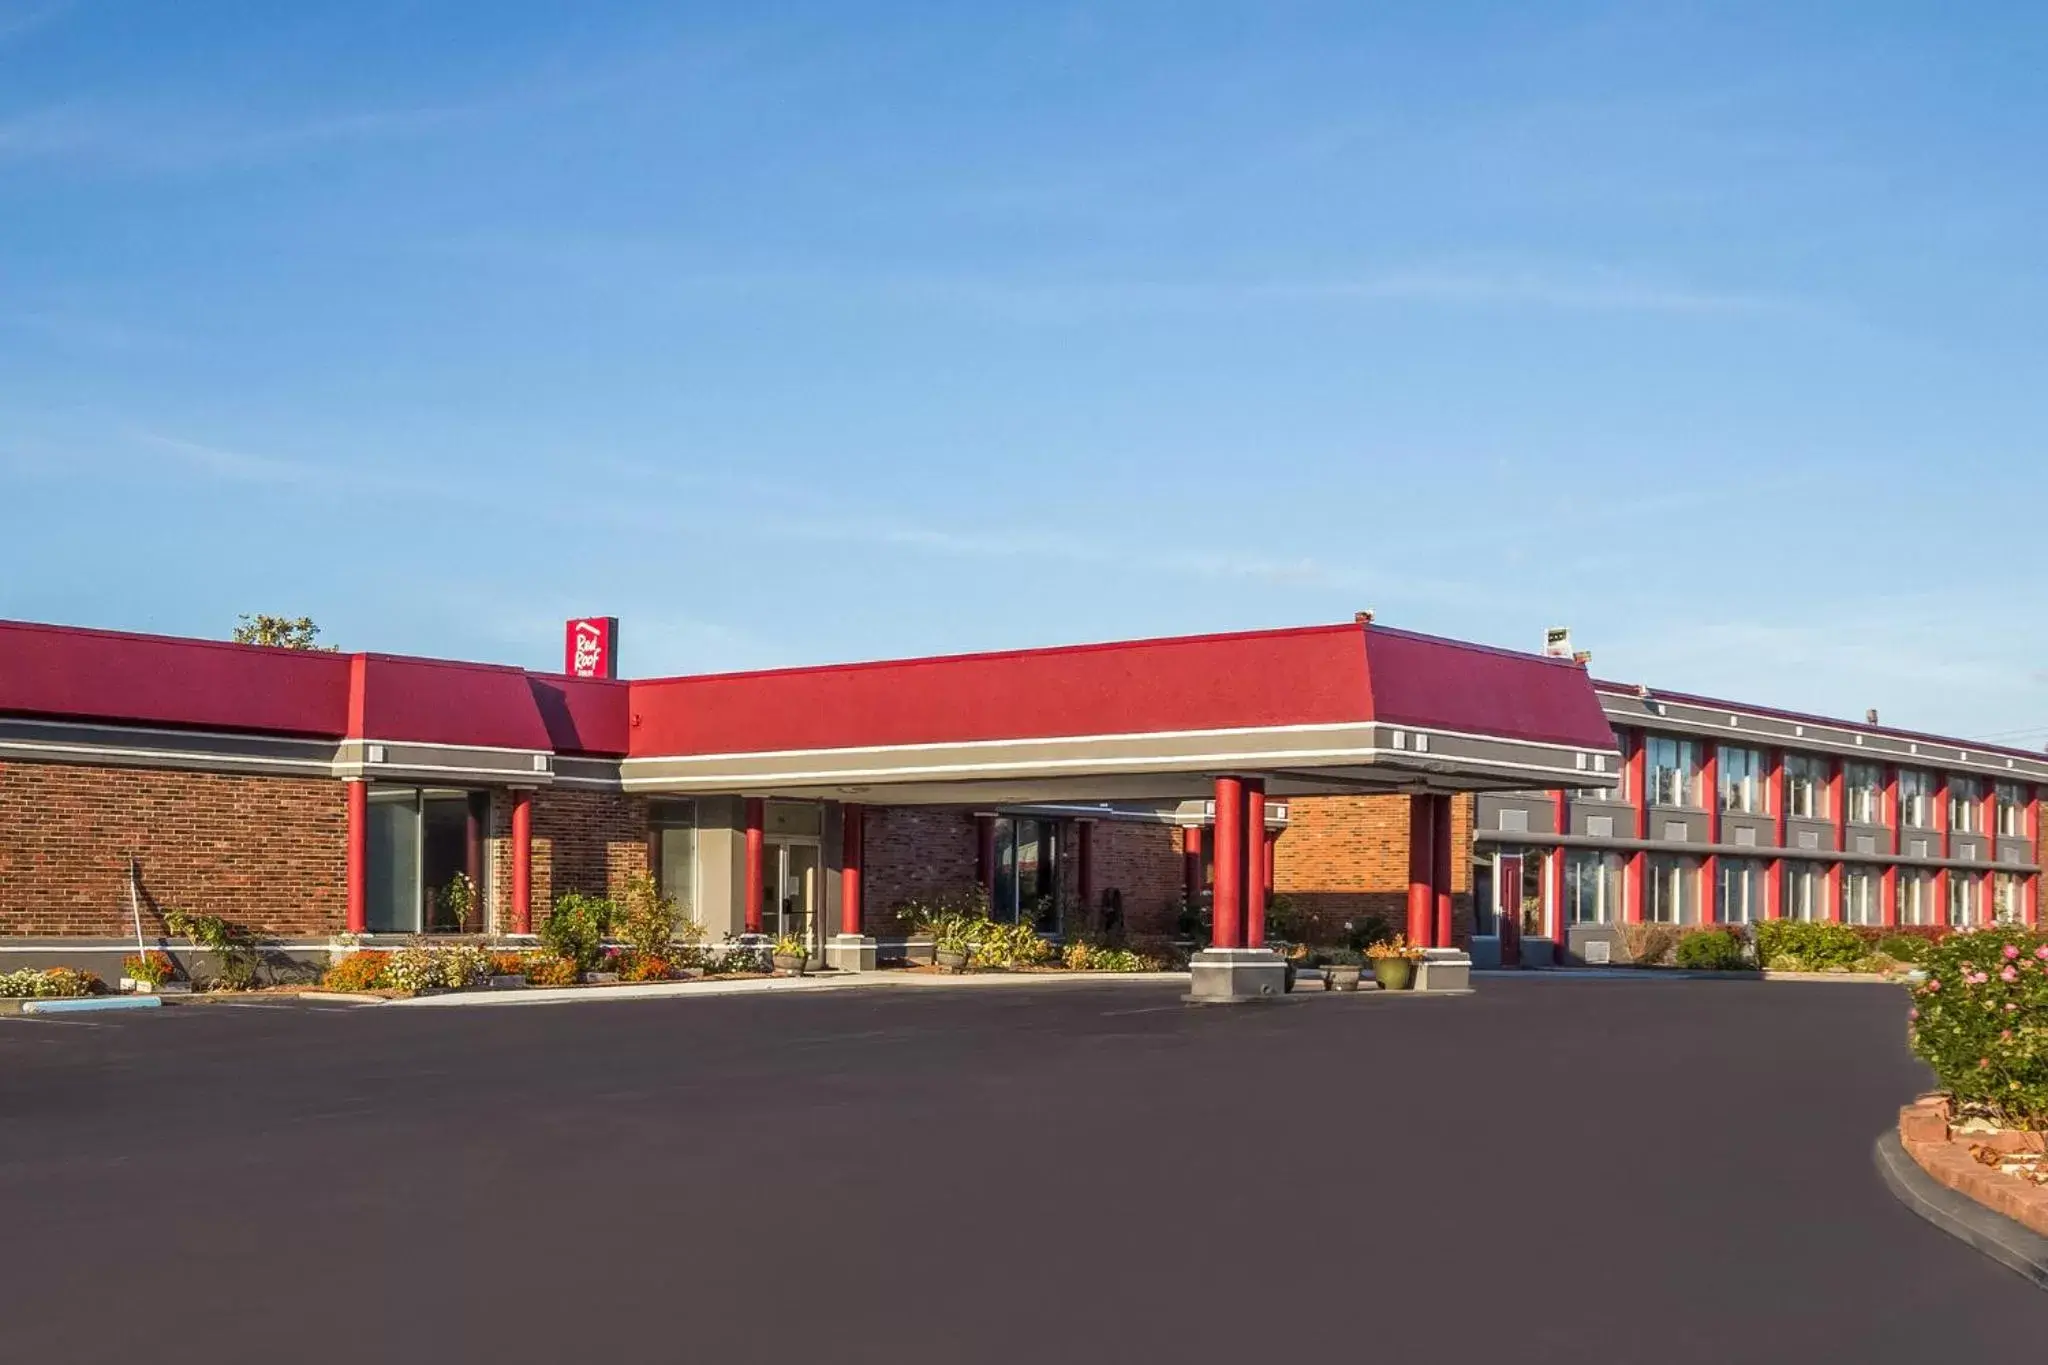 Property Building in Red Roof Inn Lexington - Winchester